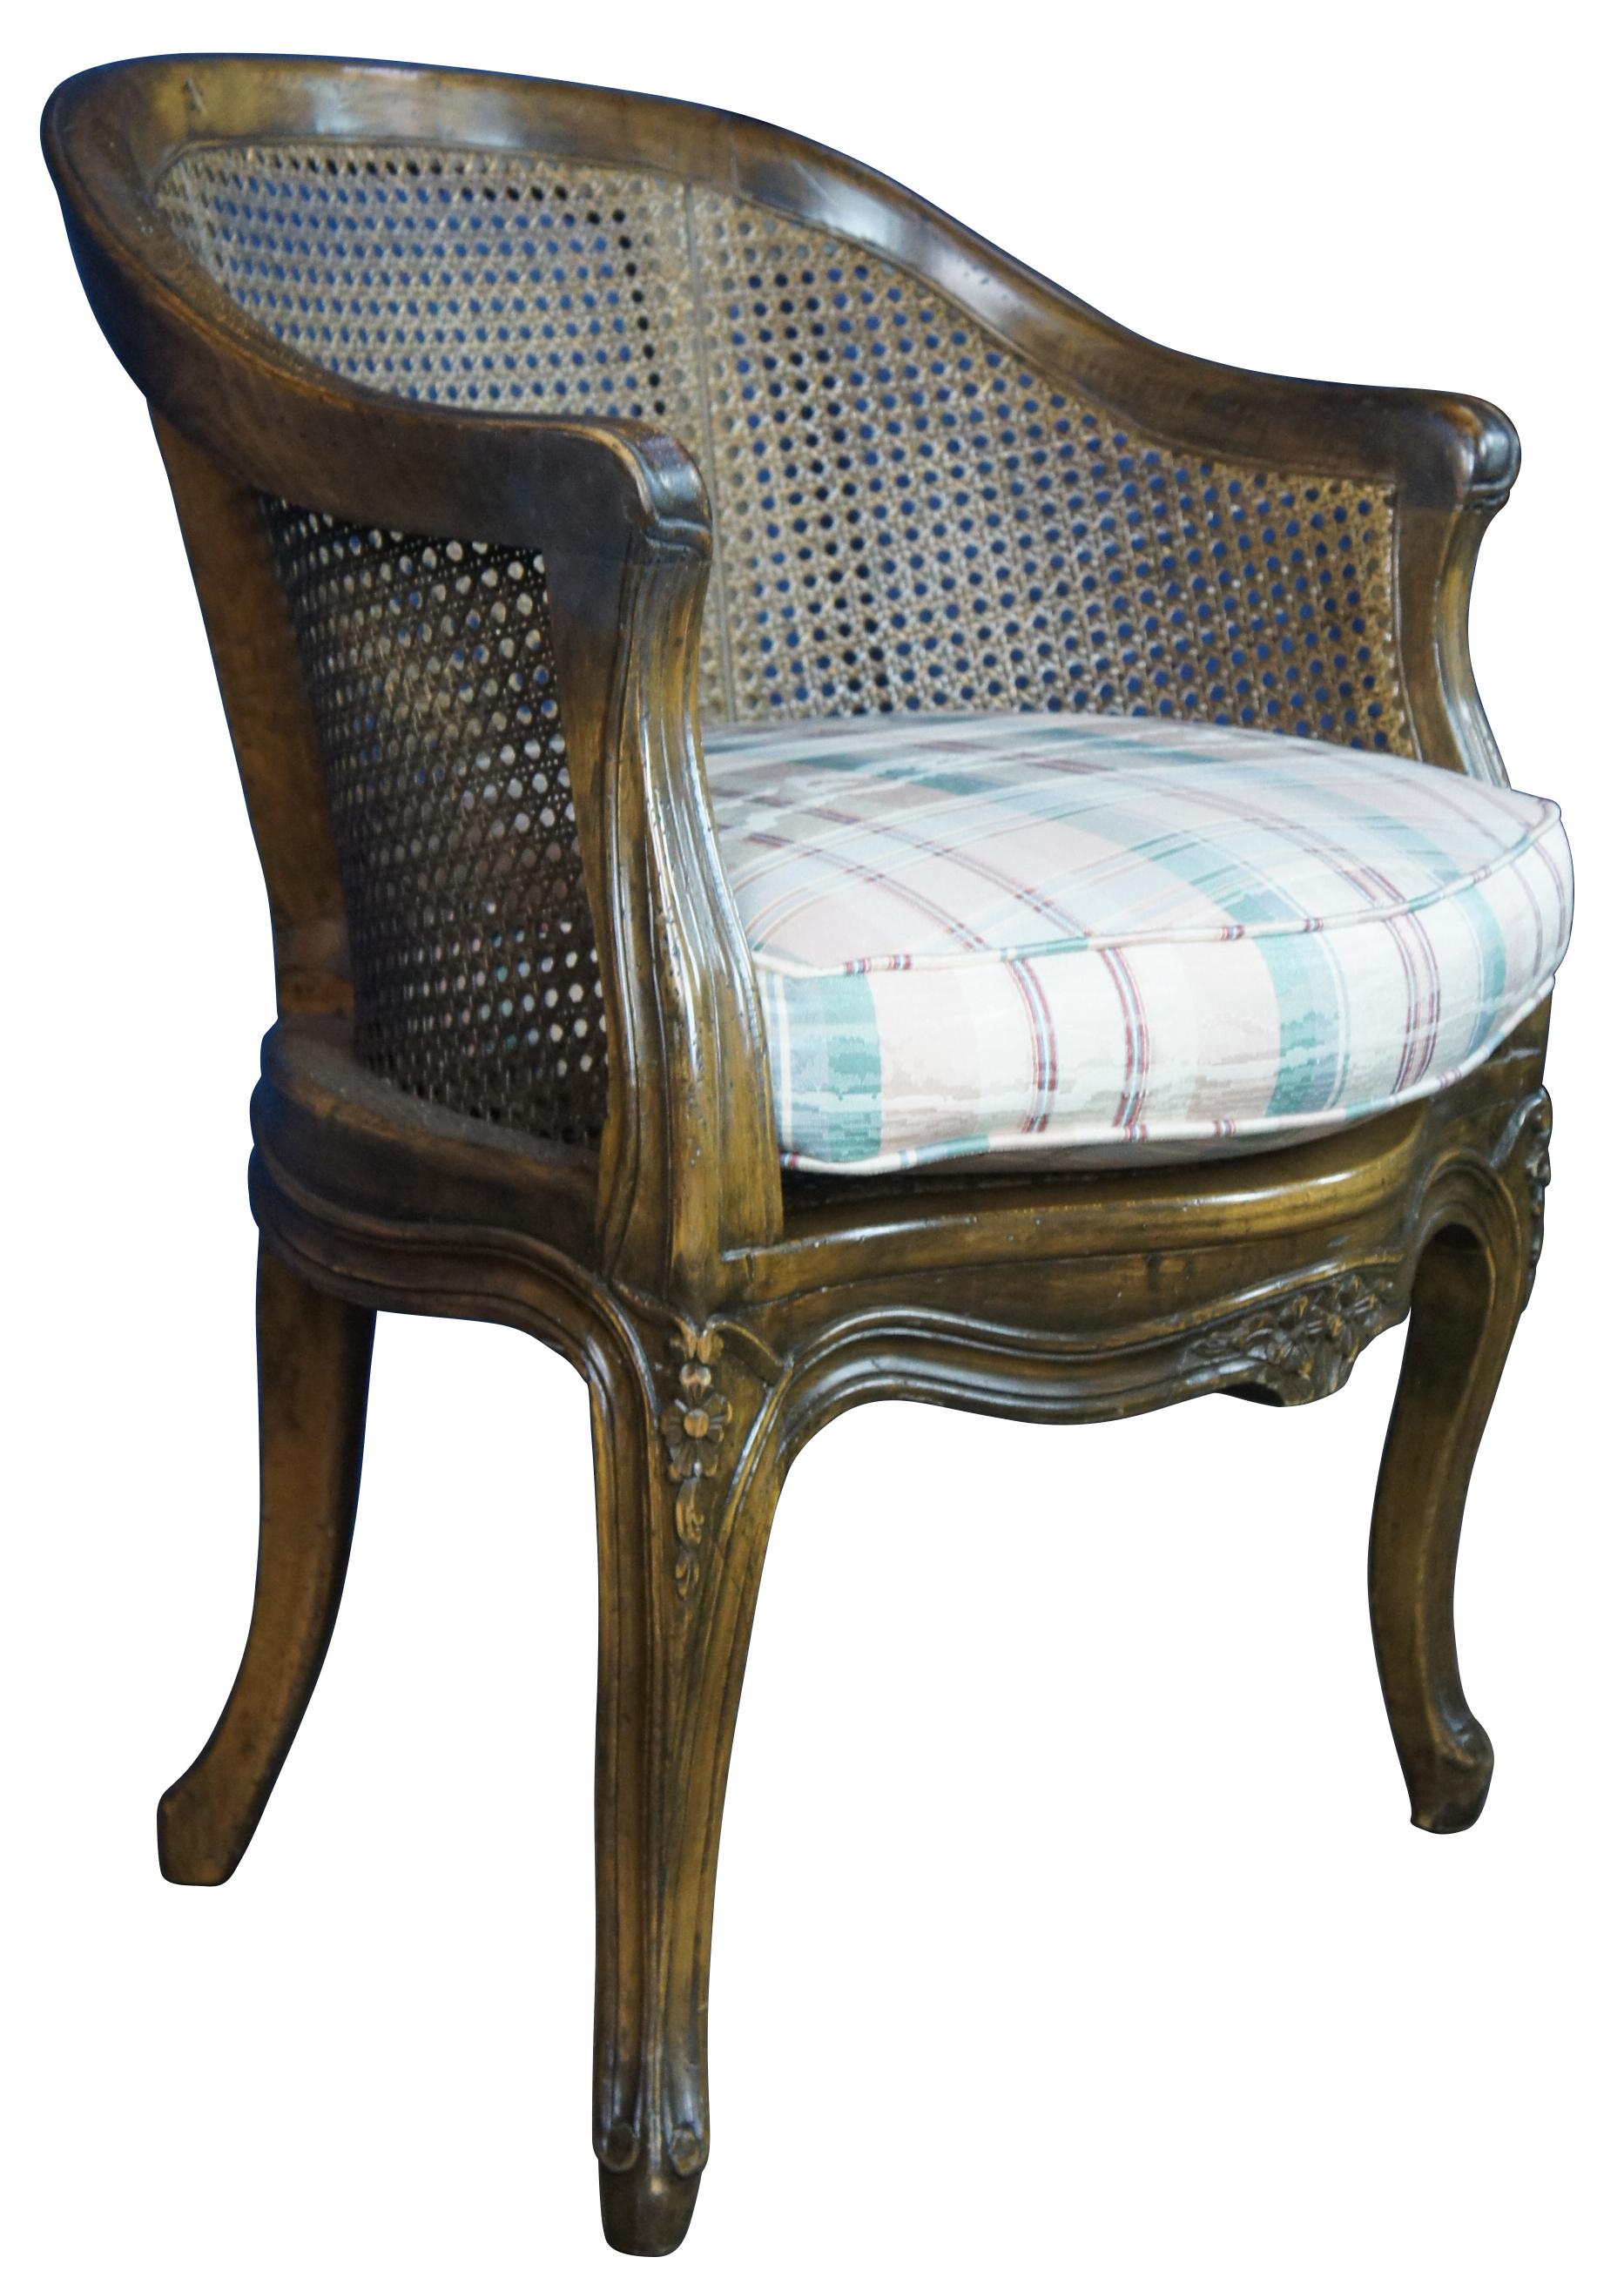 Vintage French Louis XVI style bergere club or lounge chair by Trouvailles Inc of Watertown, Ma. Made of walnut featuring serpentine form with round caned back and carved floral accents.
    